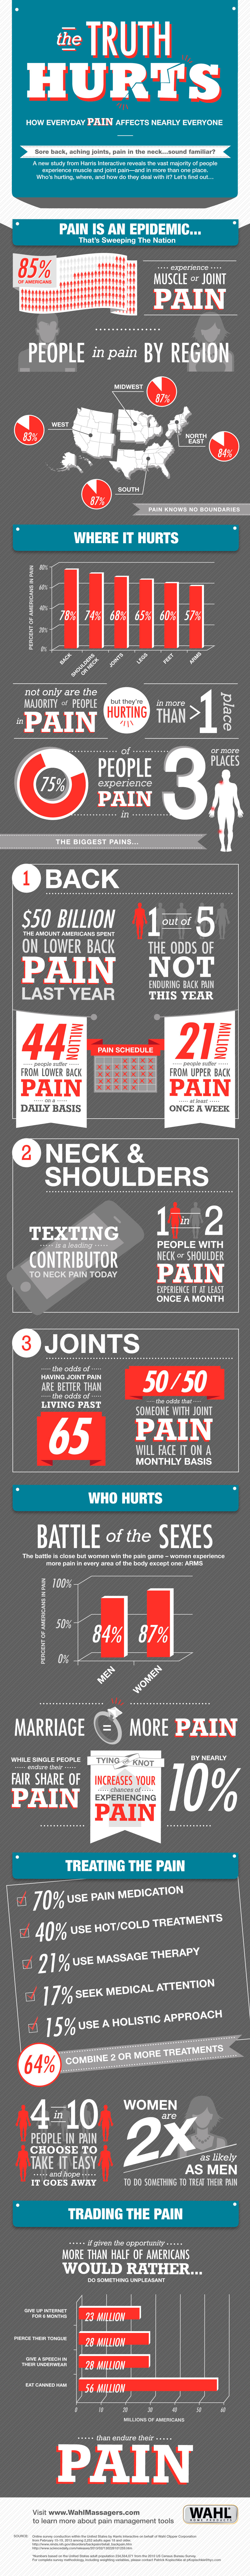 Joint Pain Facts